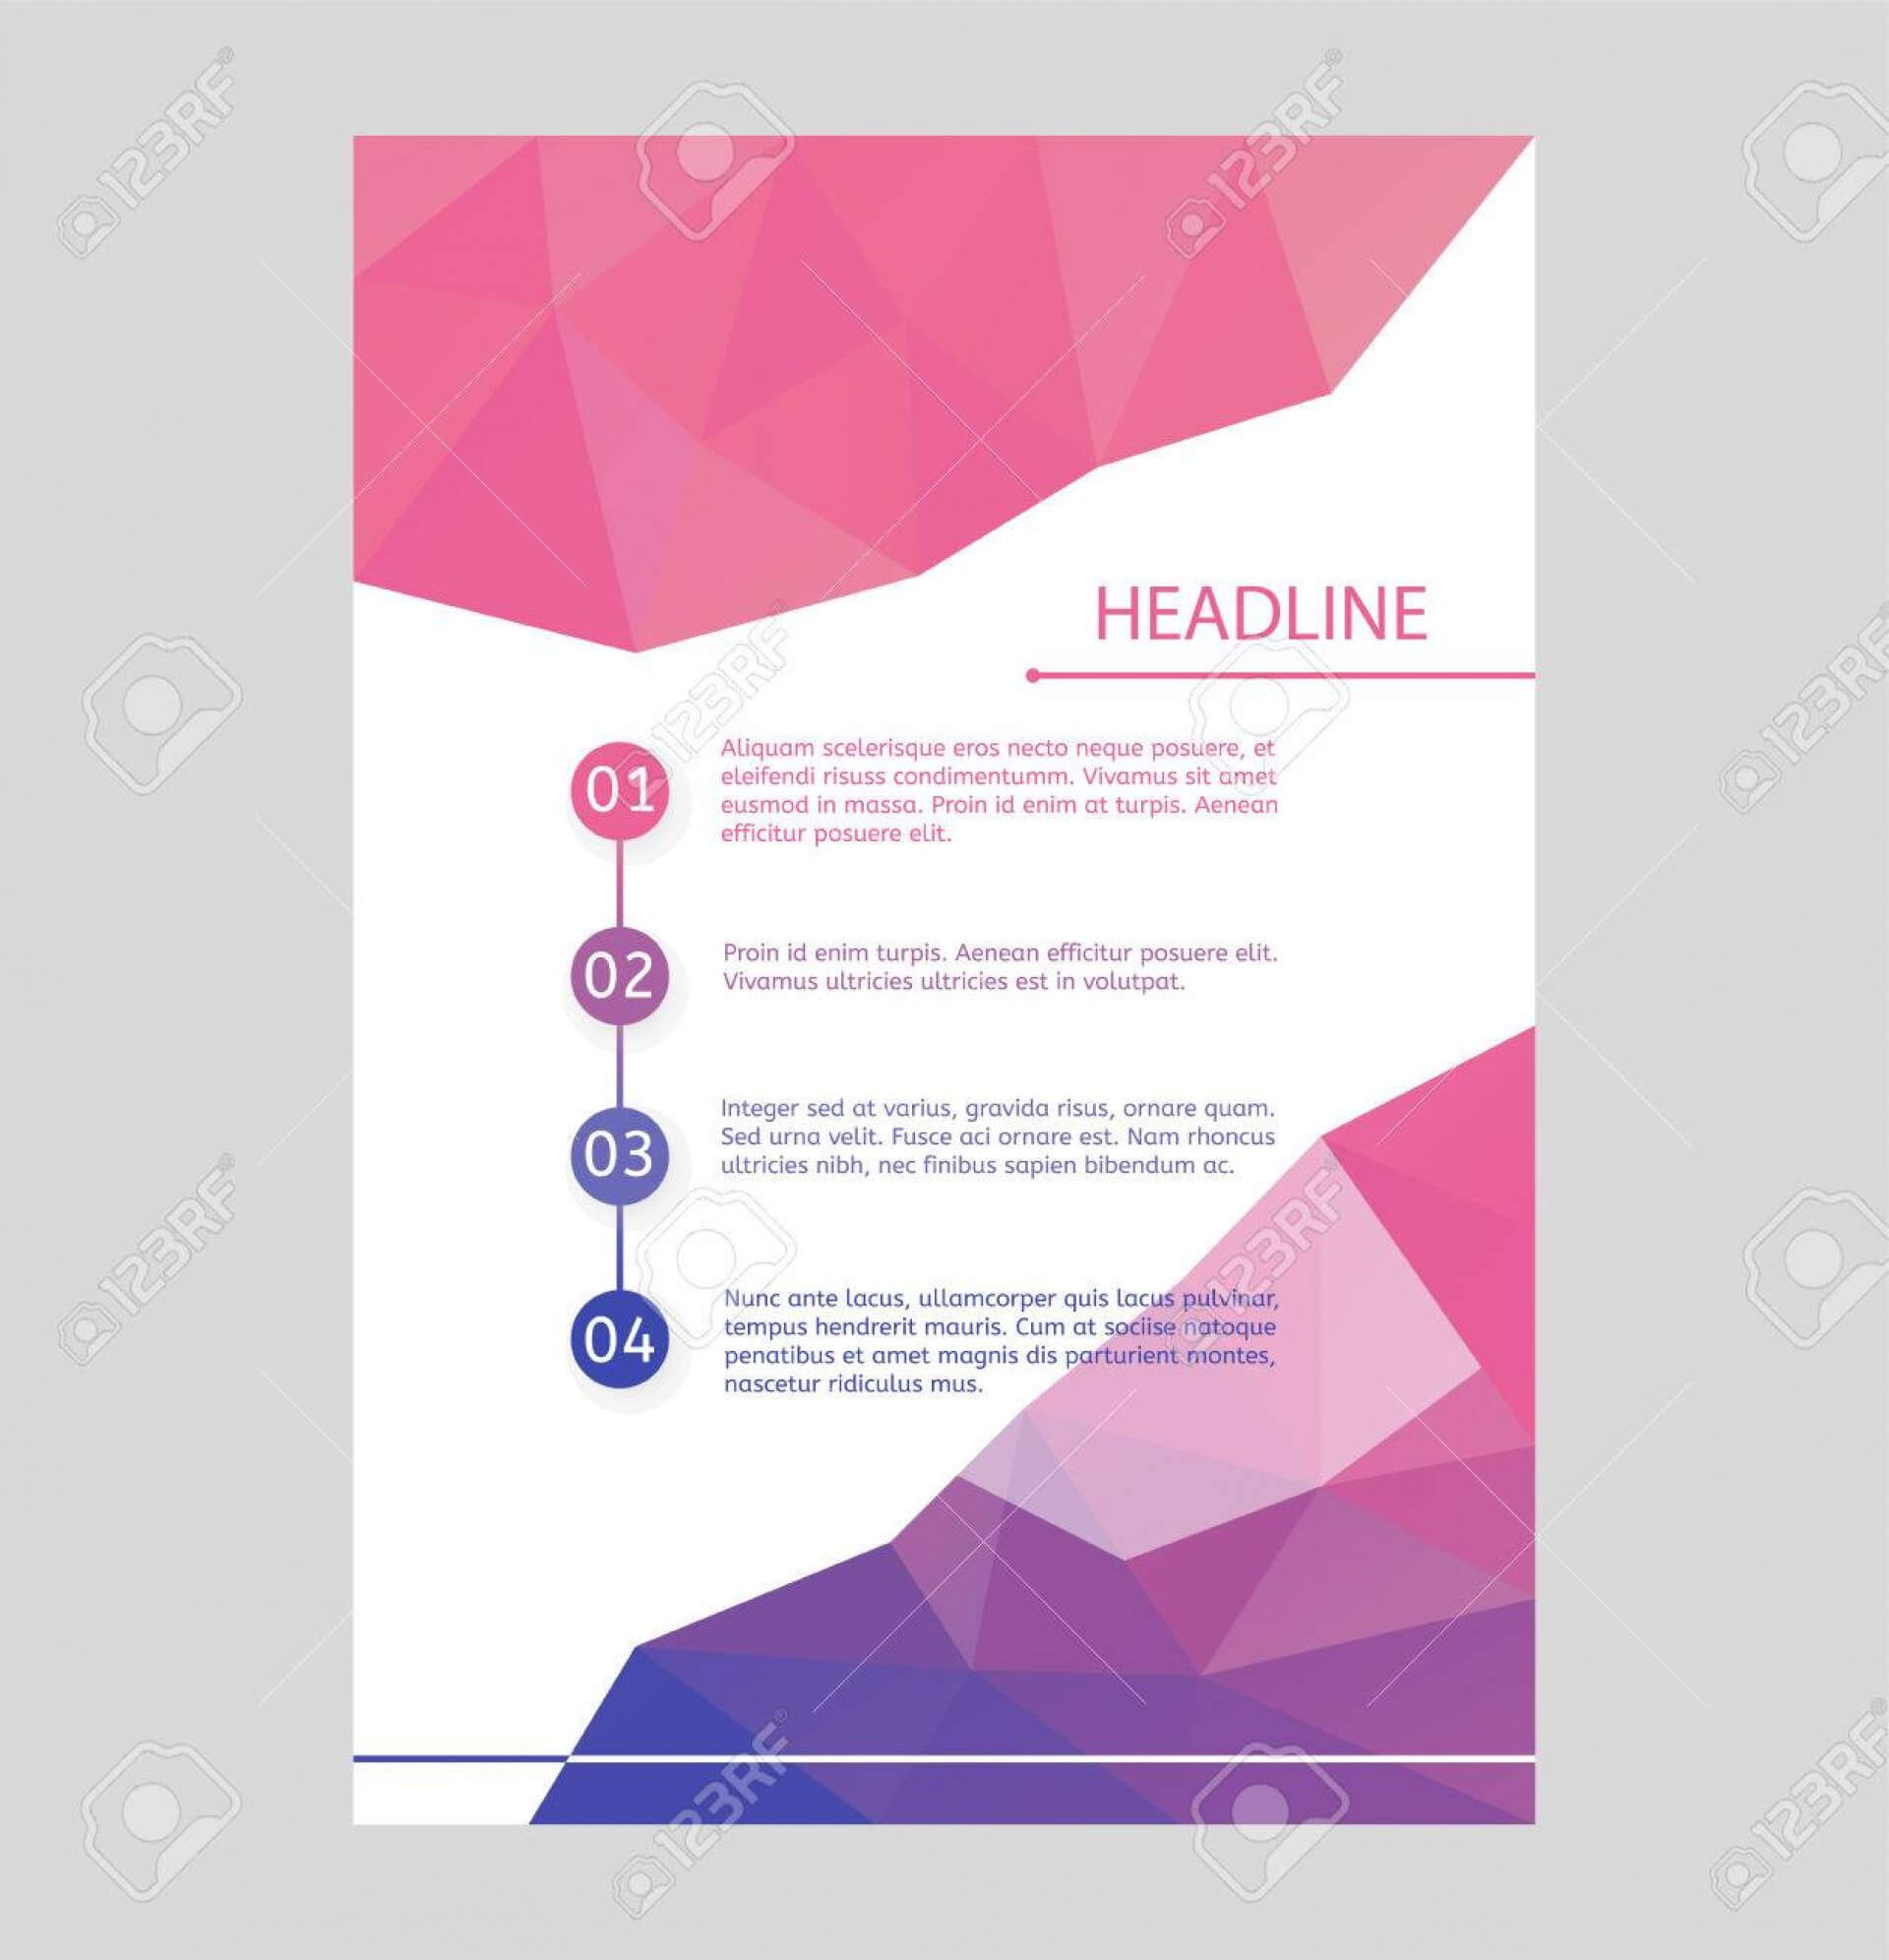 003 Free Blank Flyer Templates Template Unusual Ideas Intended For Blank Templates For Flyers